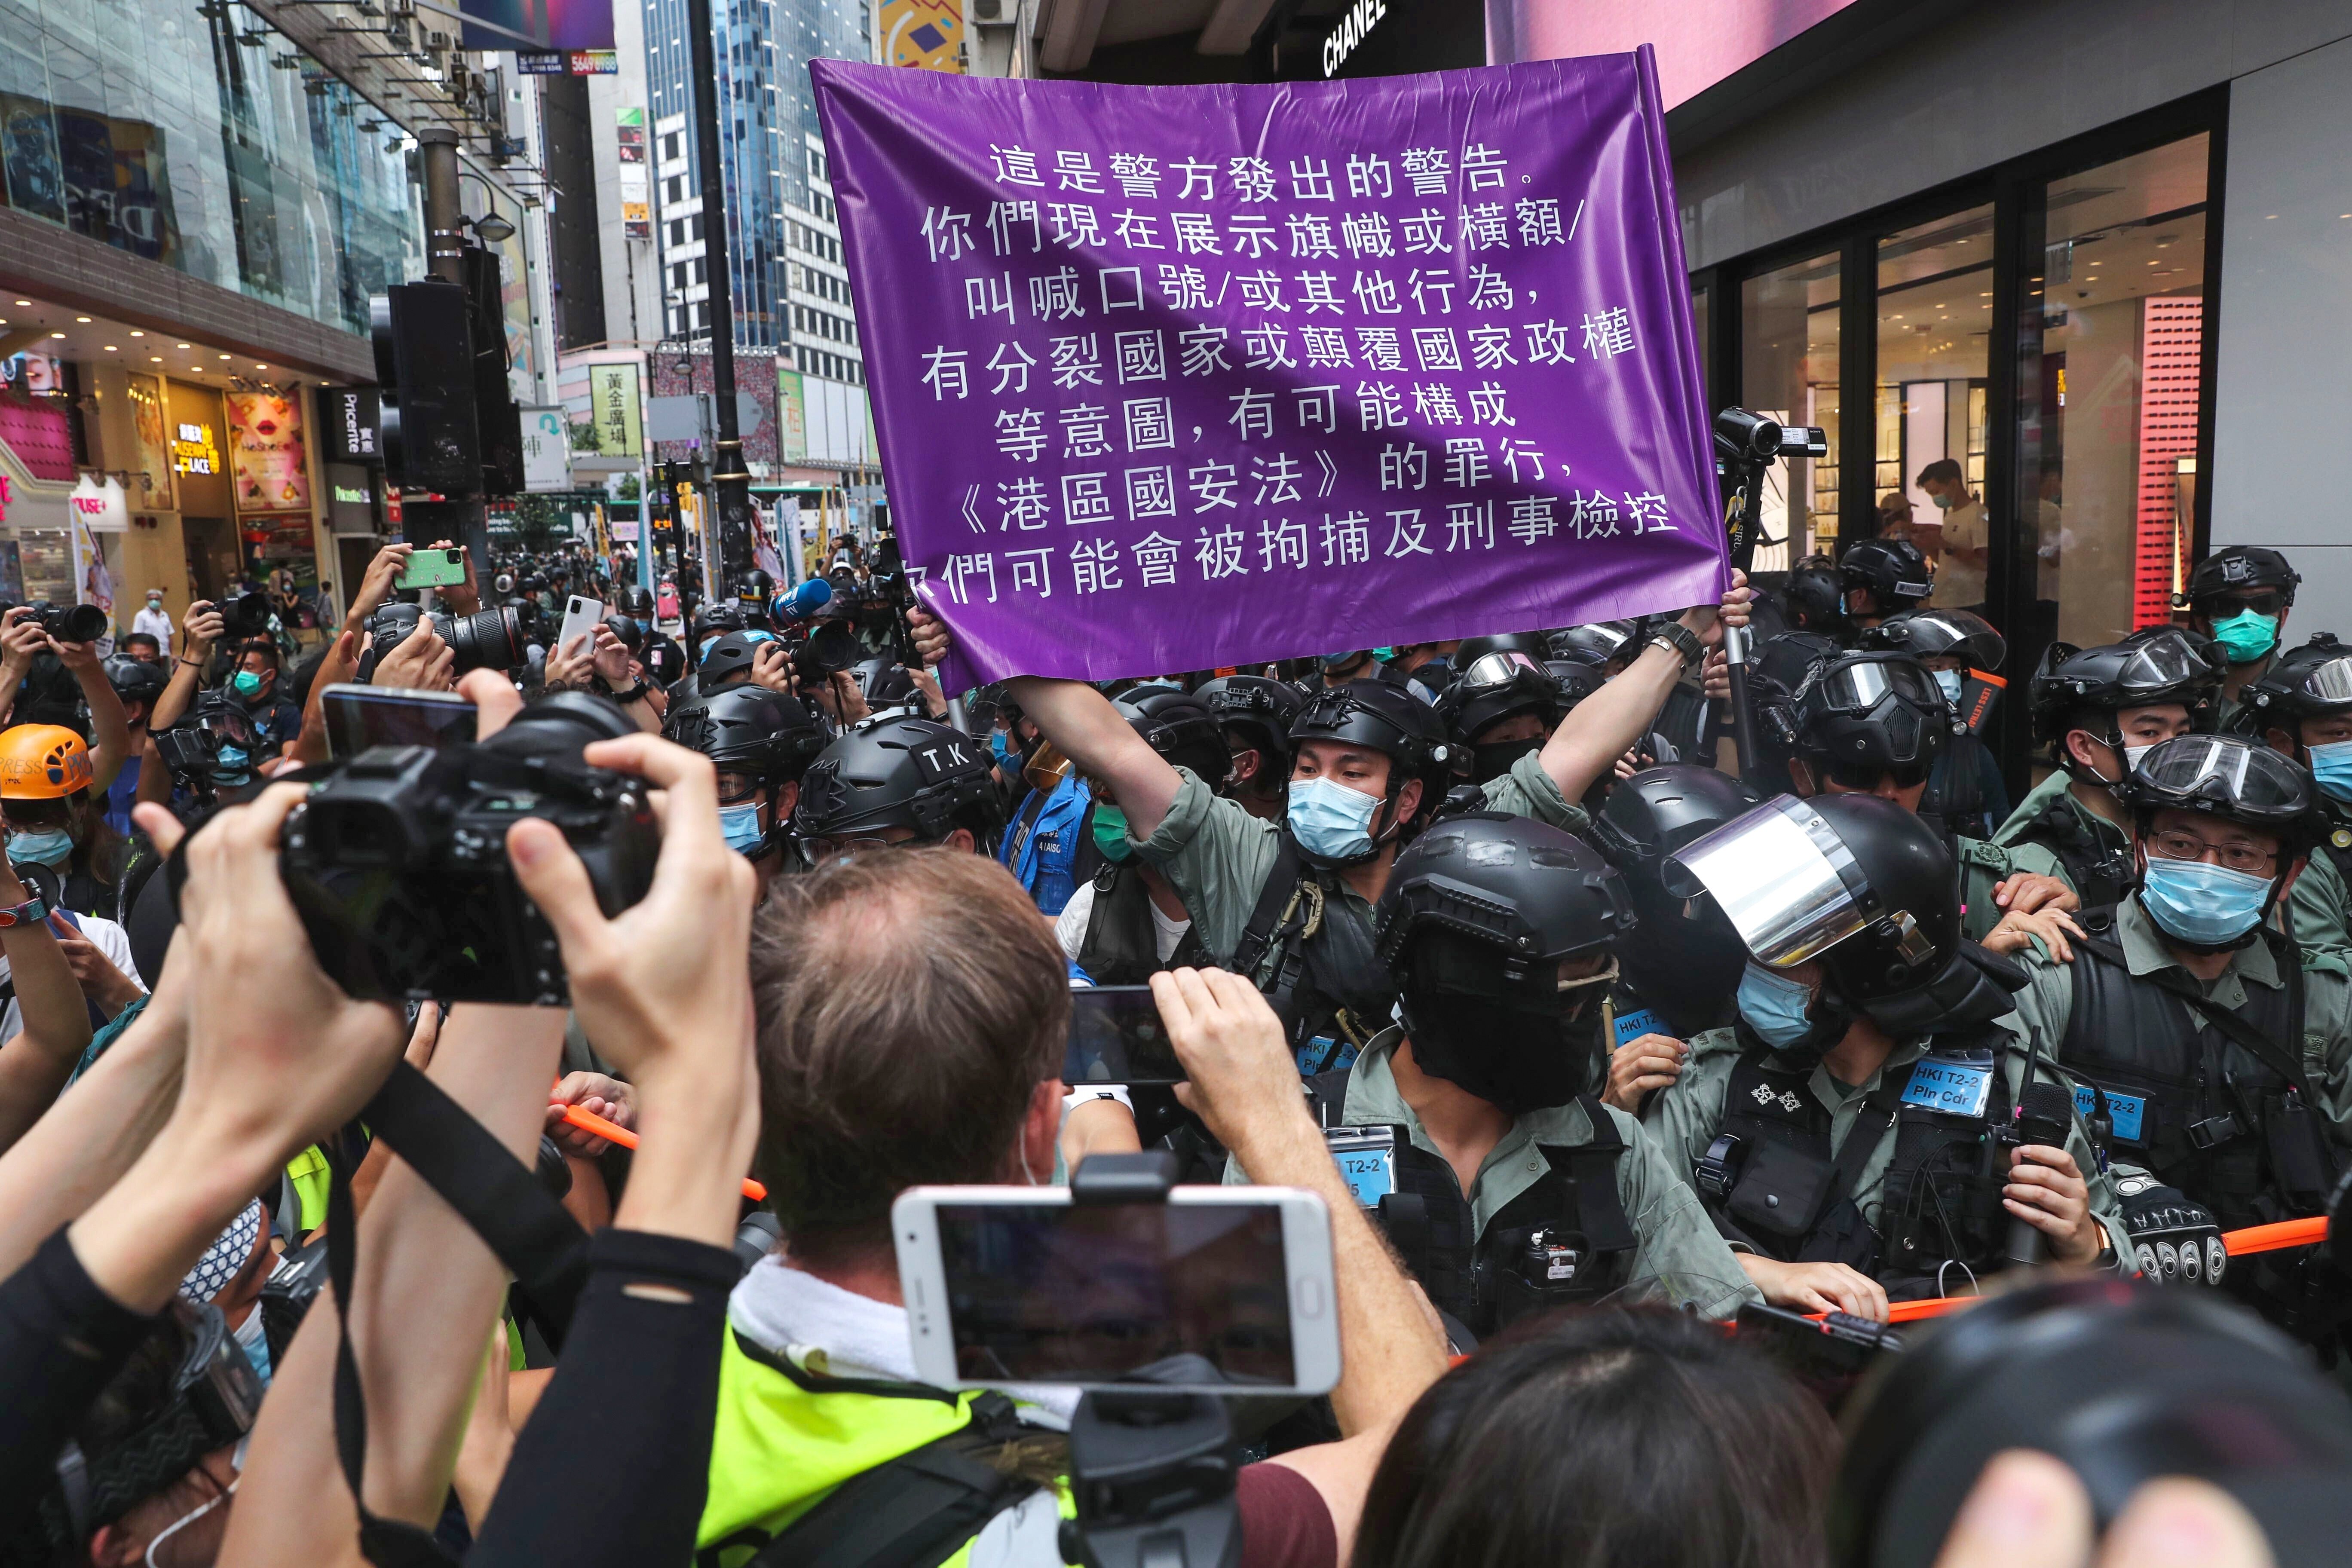 A police officer in riot gear holds up a purple flag warning anti-government protesters they may be violating the national security law during an illegal demonstration in Causeway Bay on July 1, the 23rd anniversary of the establishment of the Hong Kong Special Administrative Region. Photo: Sam Tsang